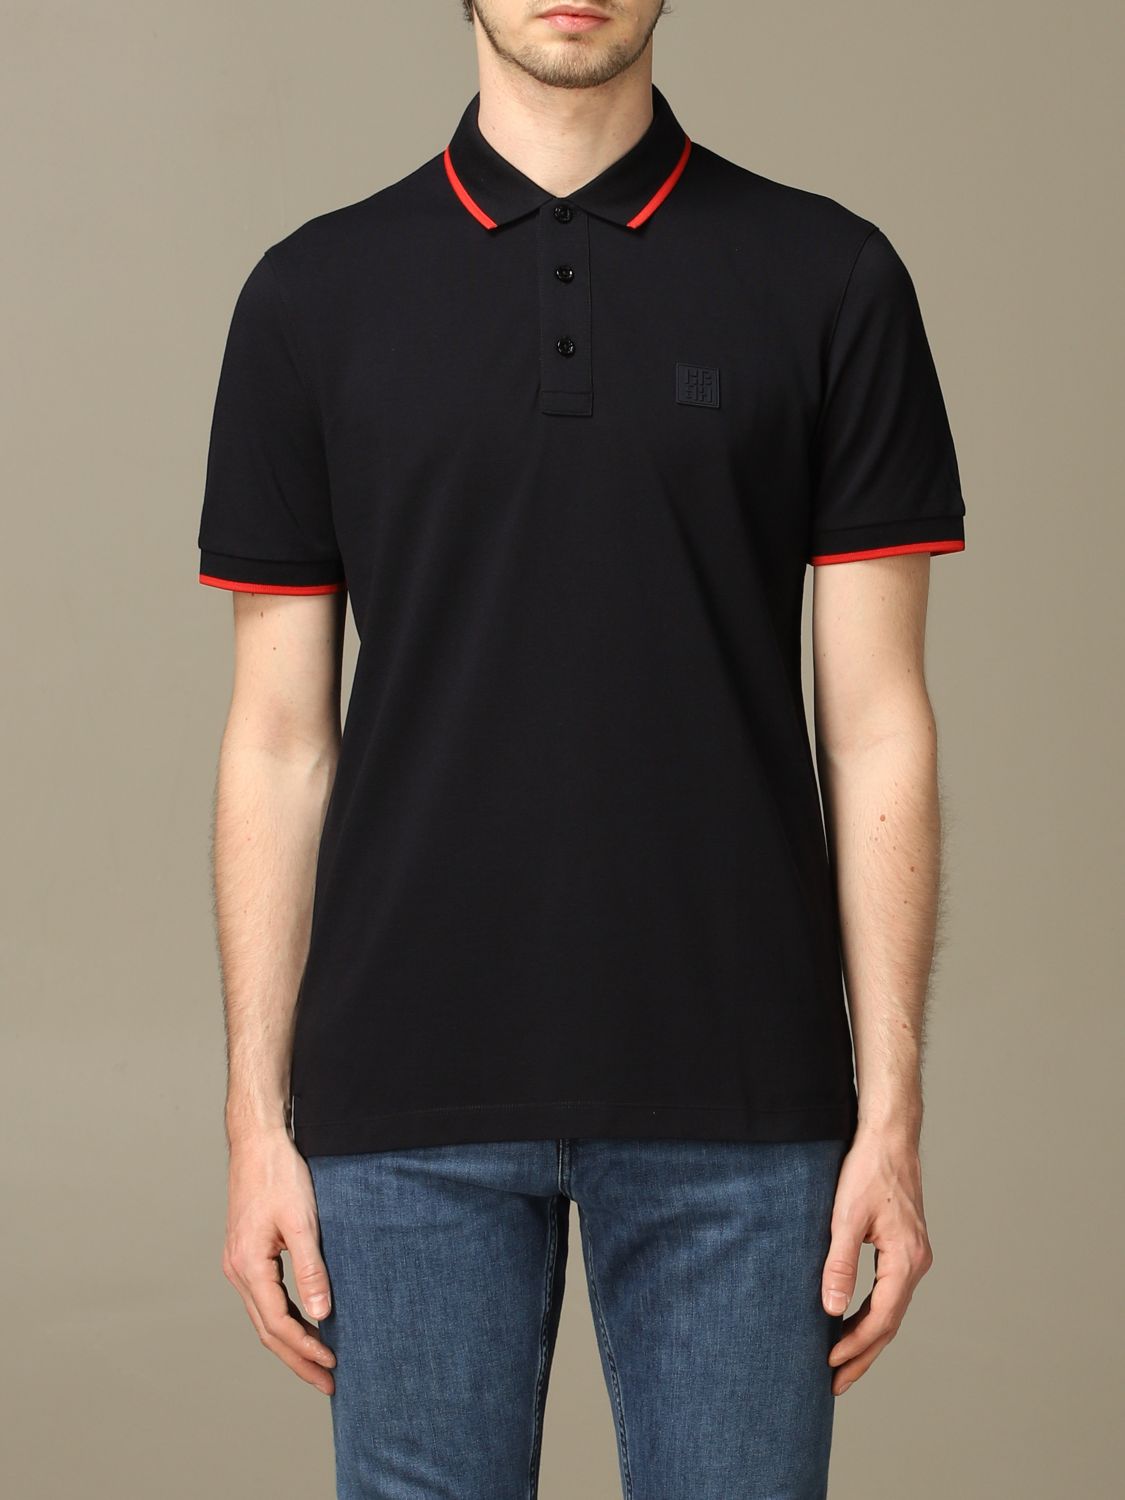 Boss Outlet: polo shirt with short sleeves and colored edges - Blue | T ...